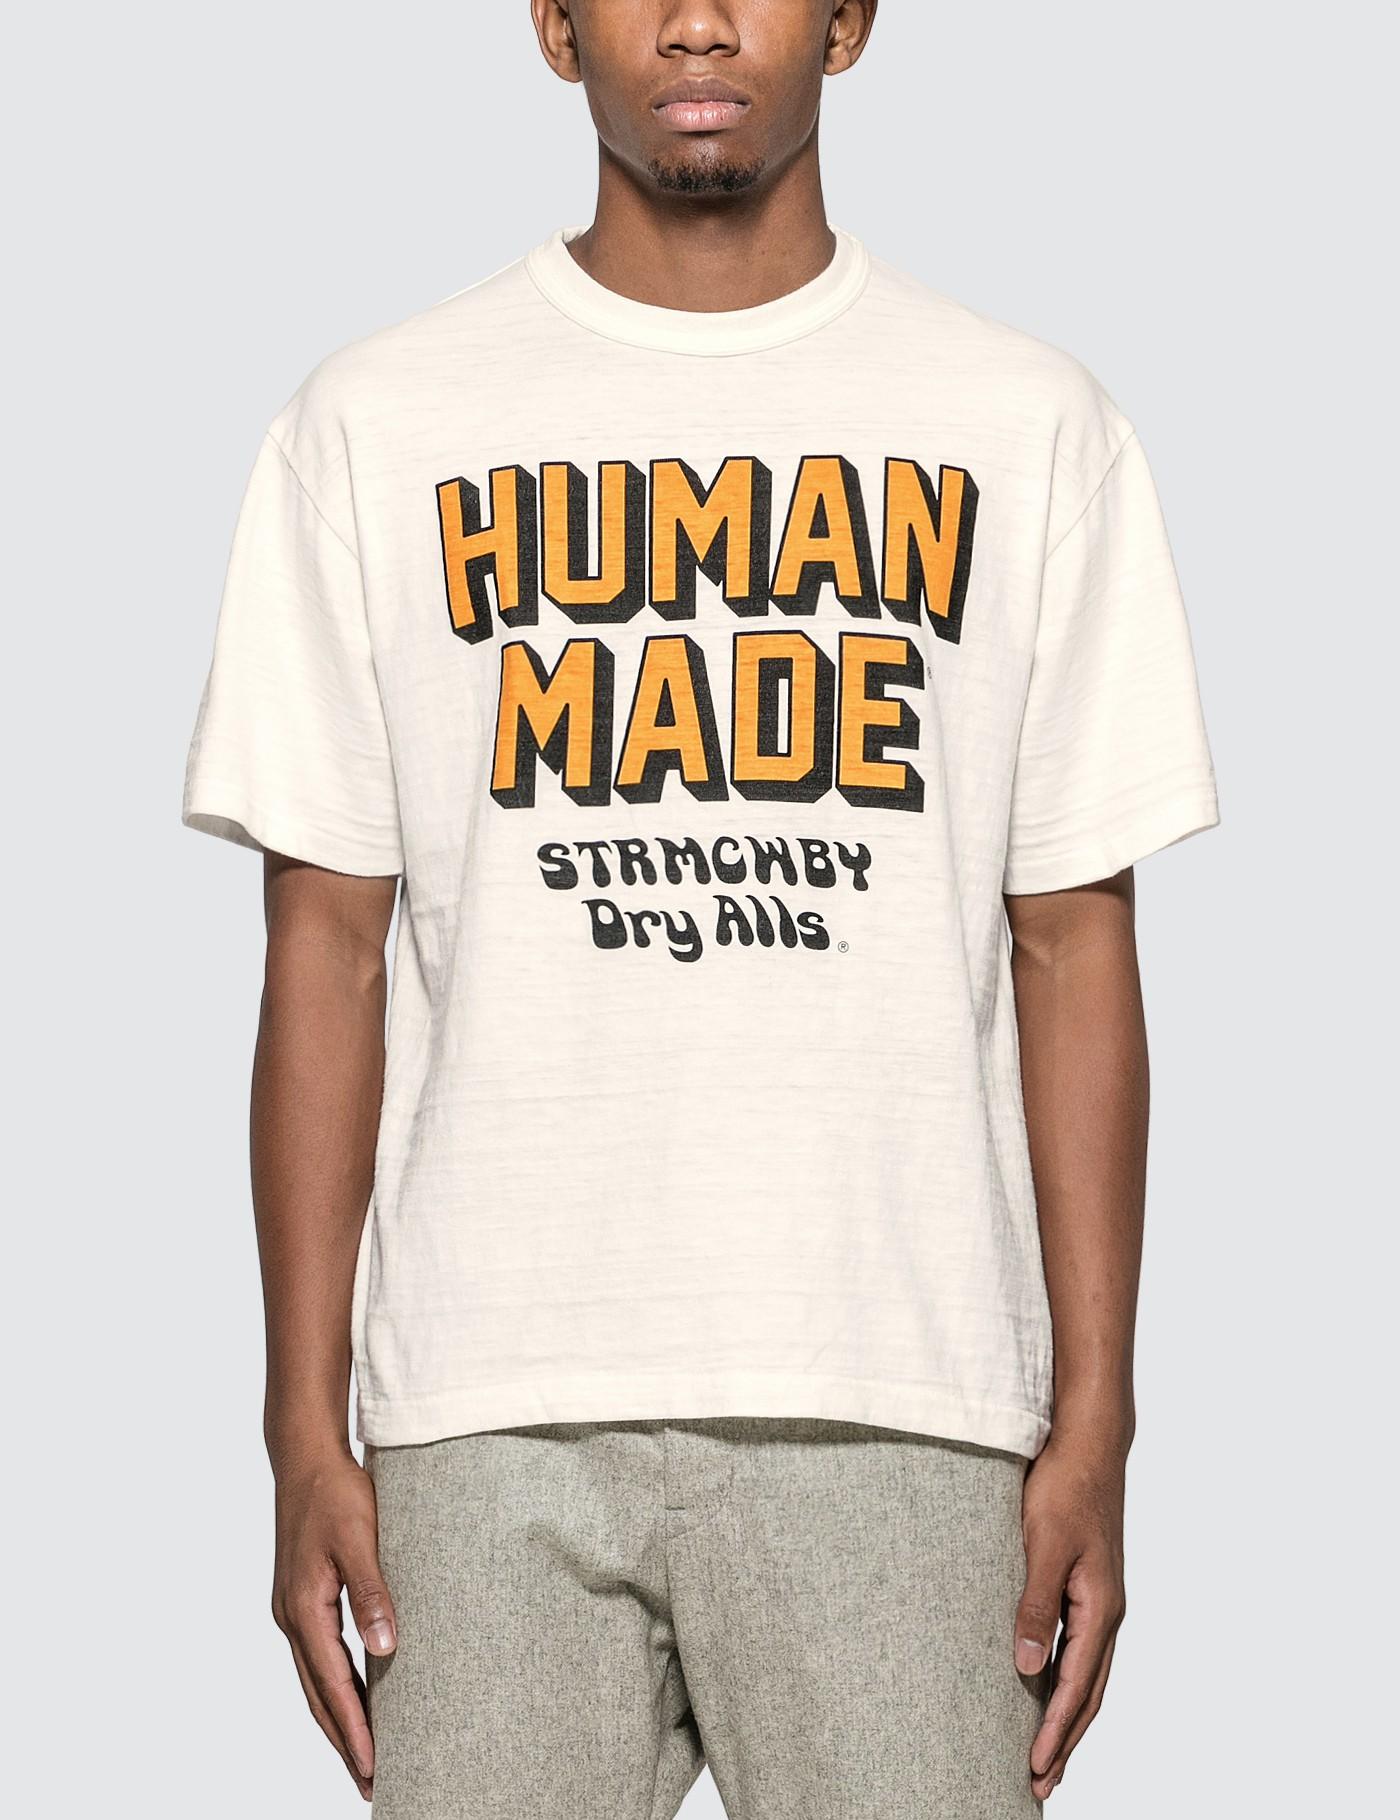 Human Made Cotton T-shirt #1807 in White for Men - Lyst